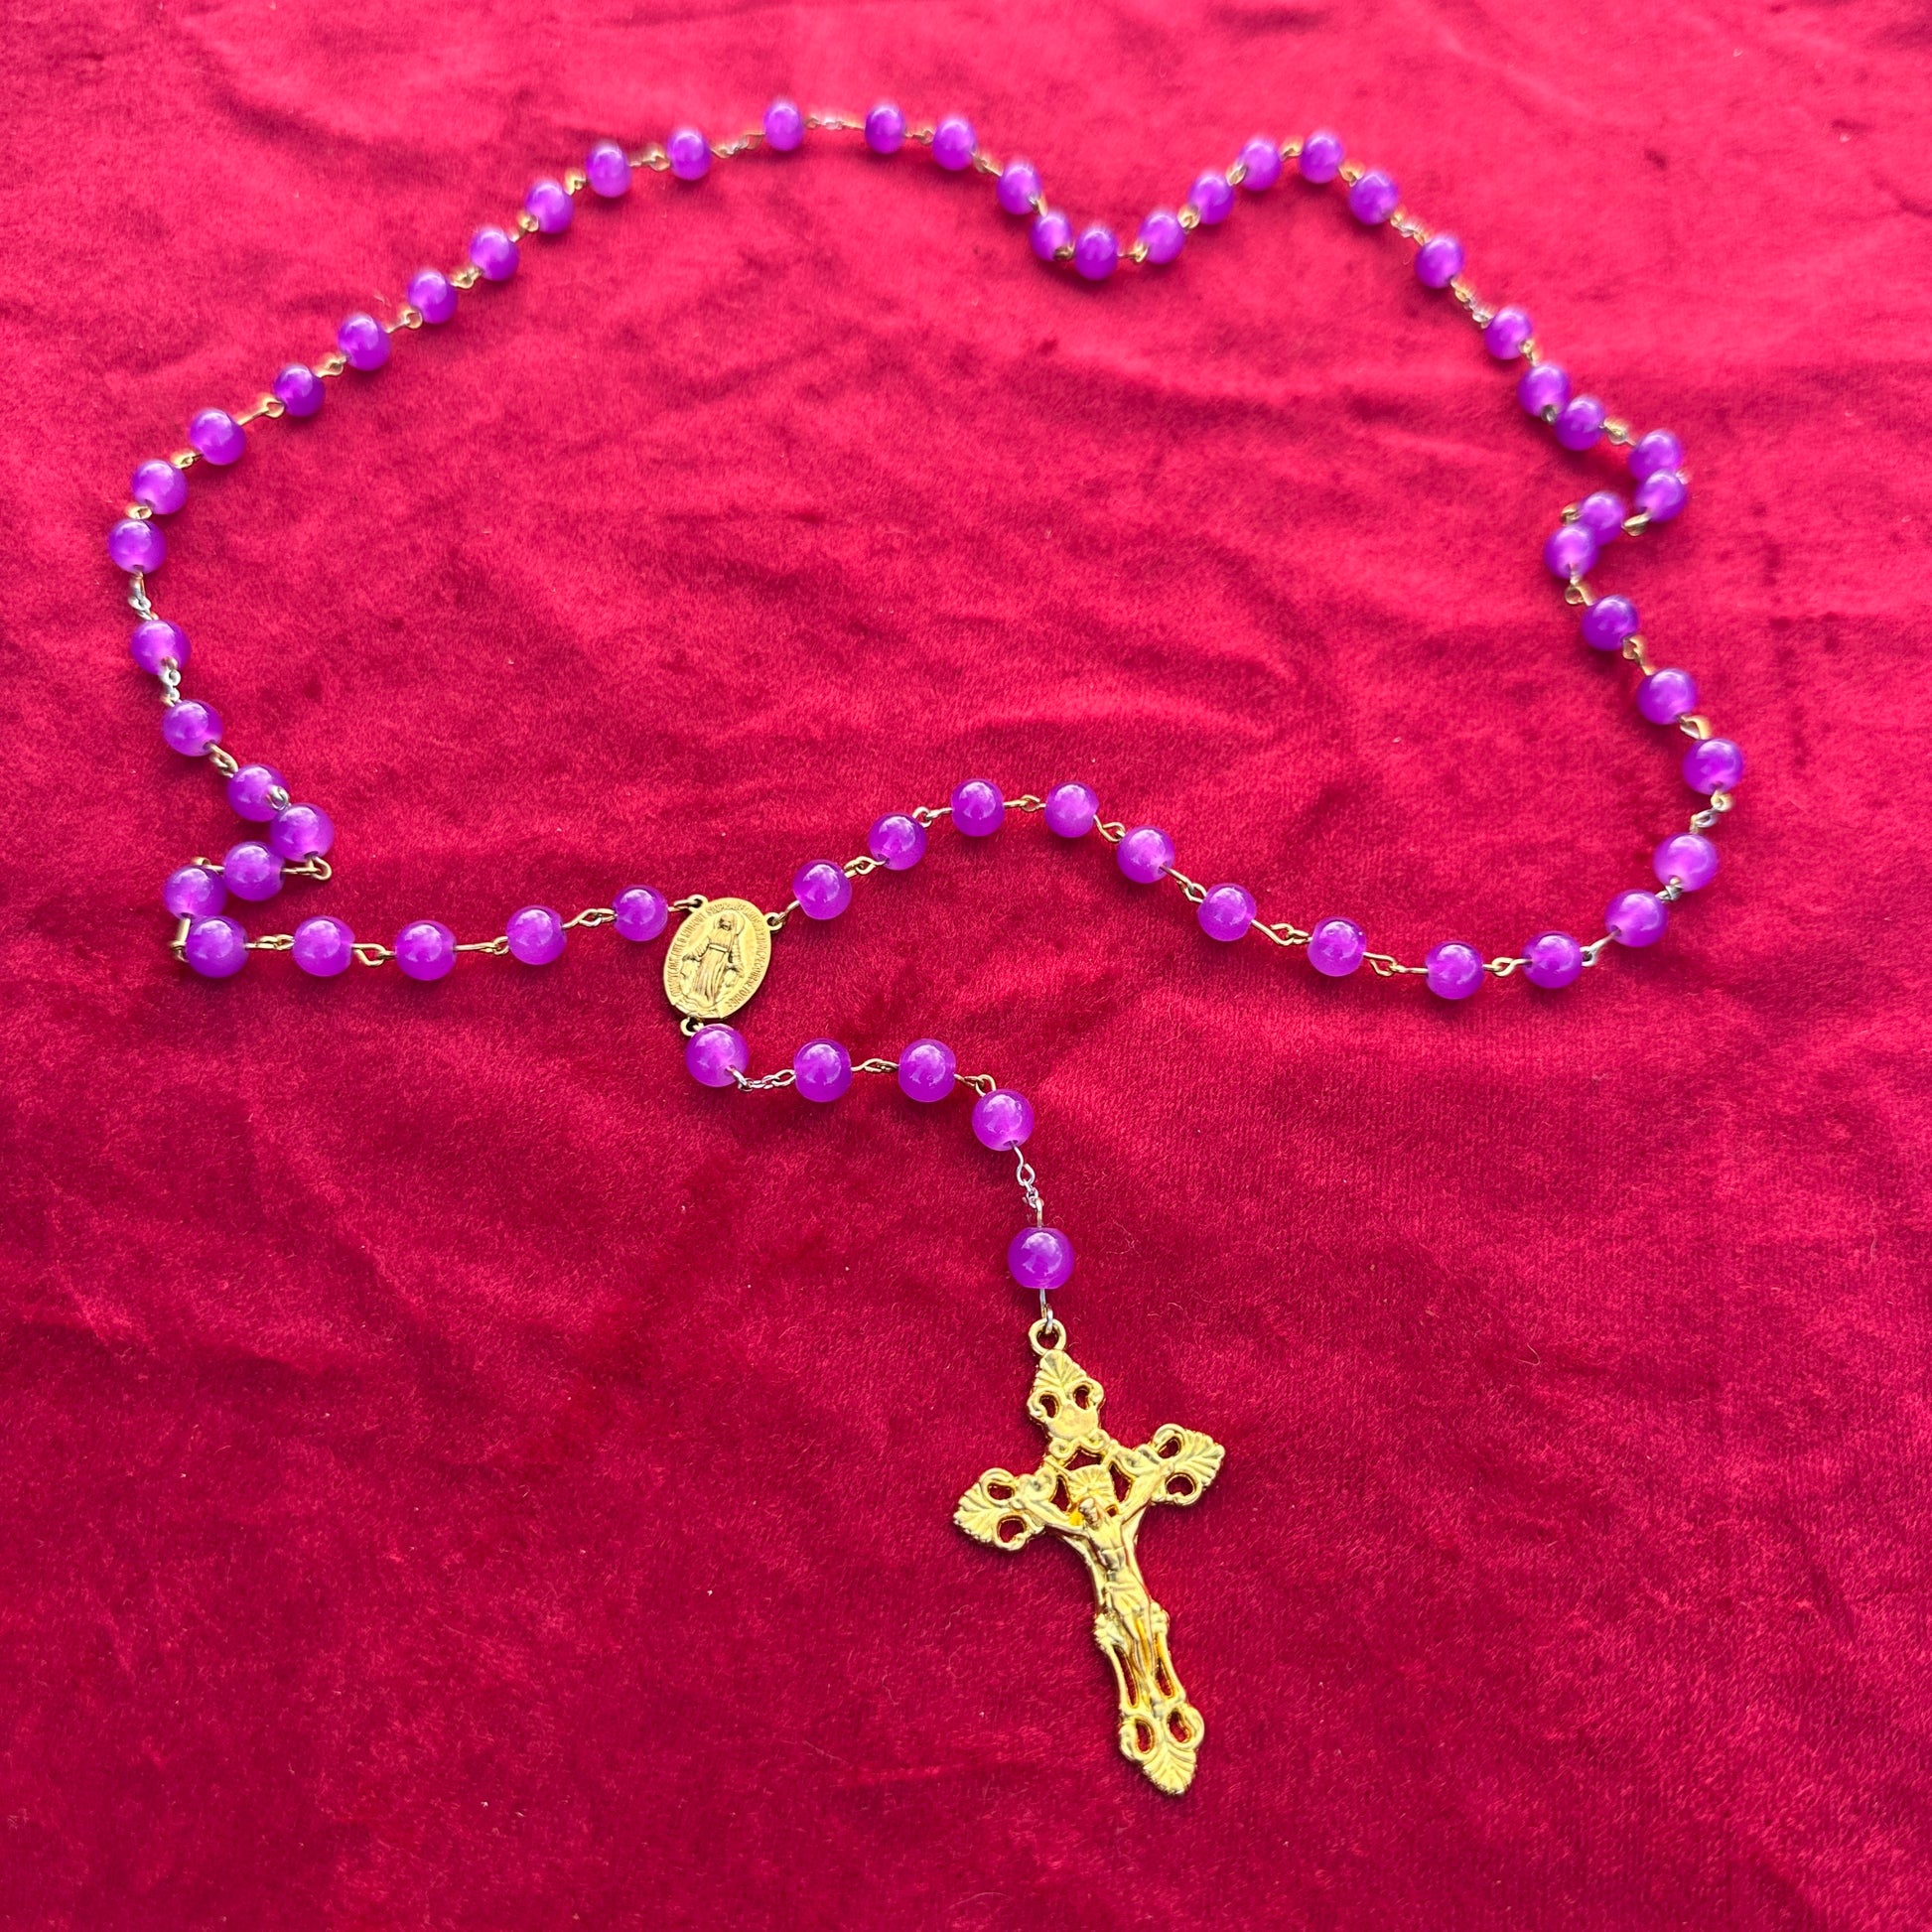 Traditional rosary beads